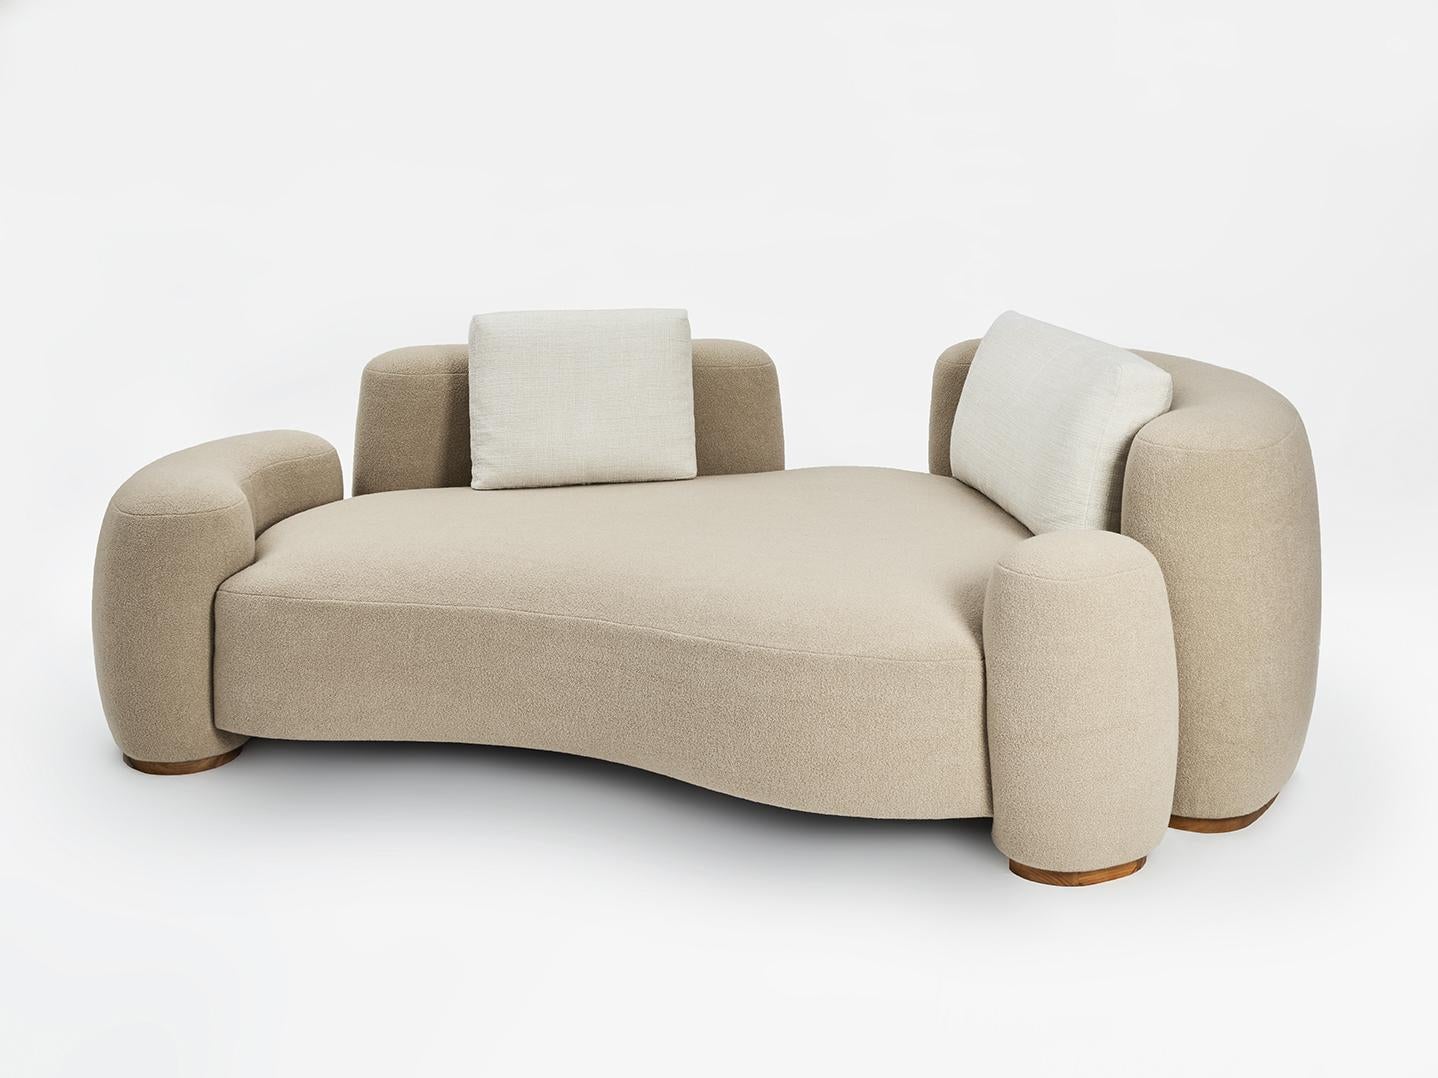 Beige Baba daybed by Gisbert Pöppler
Dimensions: H 82 (43) x W 250 x D 170 cm
Materials: Upholstered wooden frame, teak footings

Like a friend that wants to cuddle, Baba is an upholstered sofa series for lounging in complete comfort. The